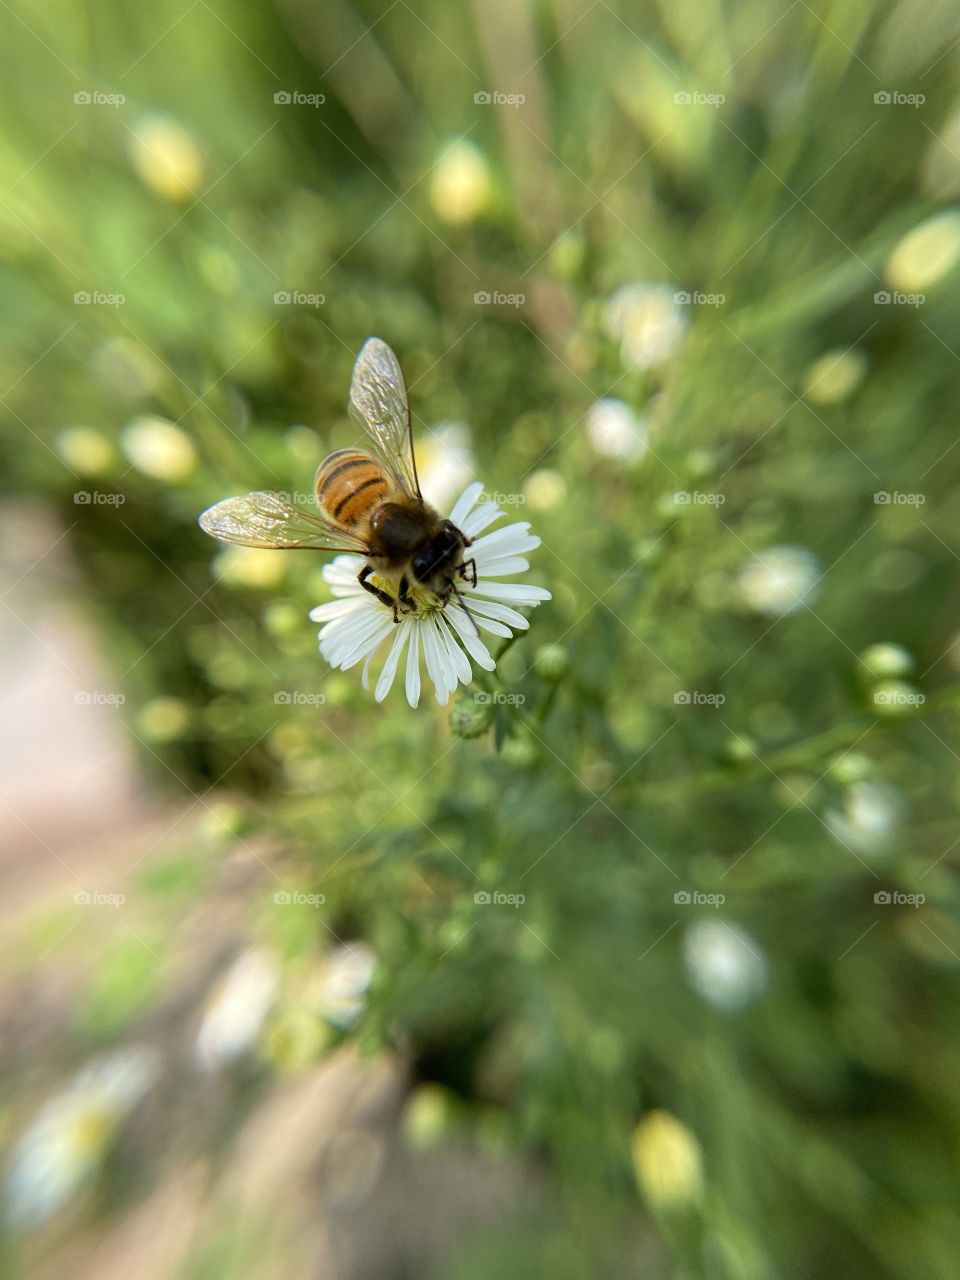 Honey Bee on a Flower. Blurred background, macro lens. Late summer day, warm and sunny day.